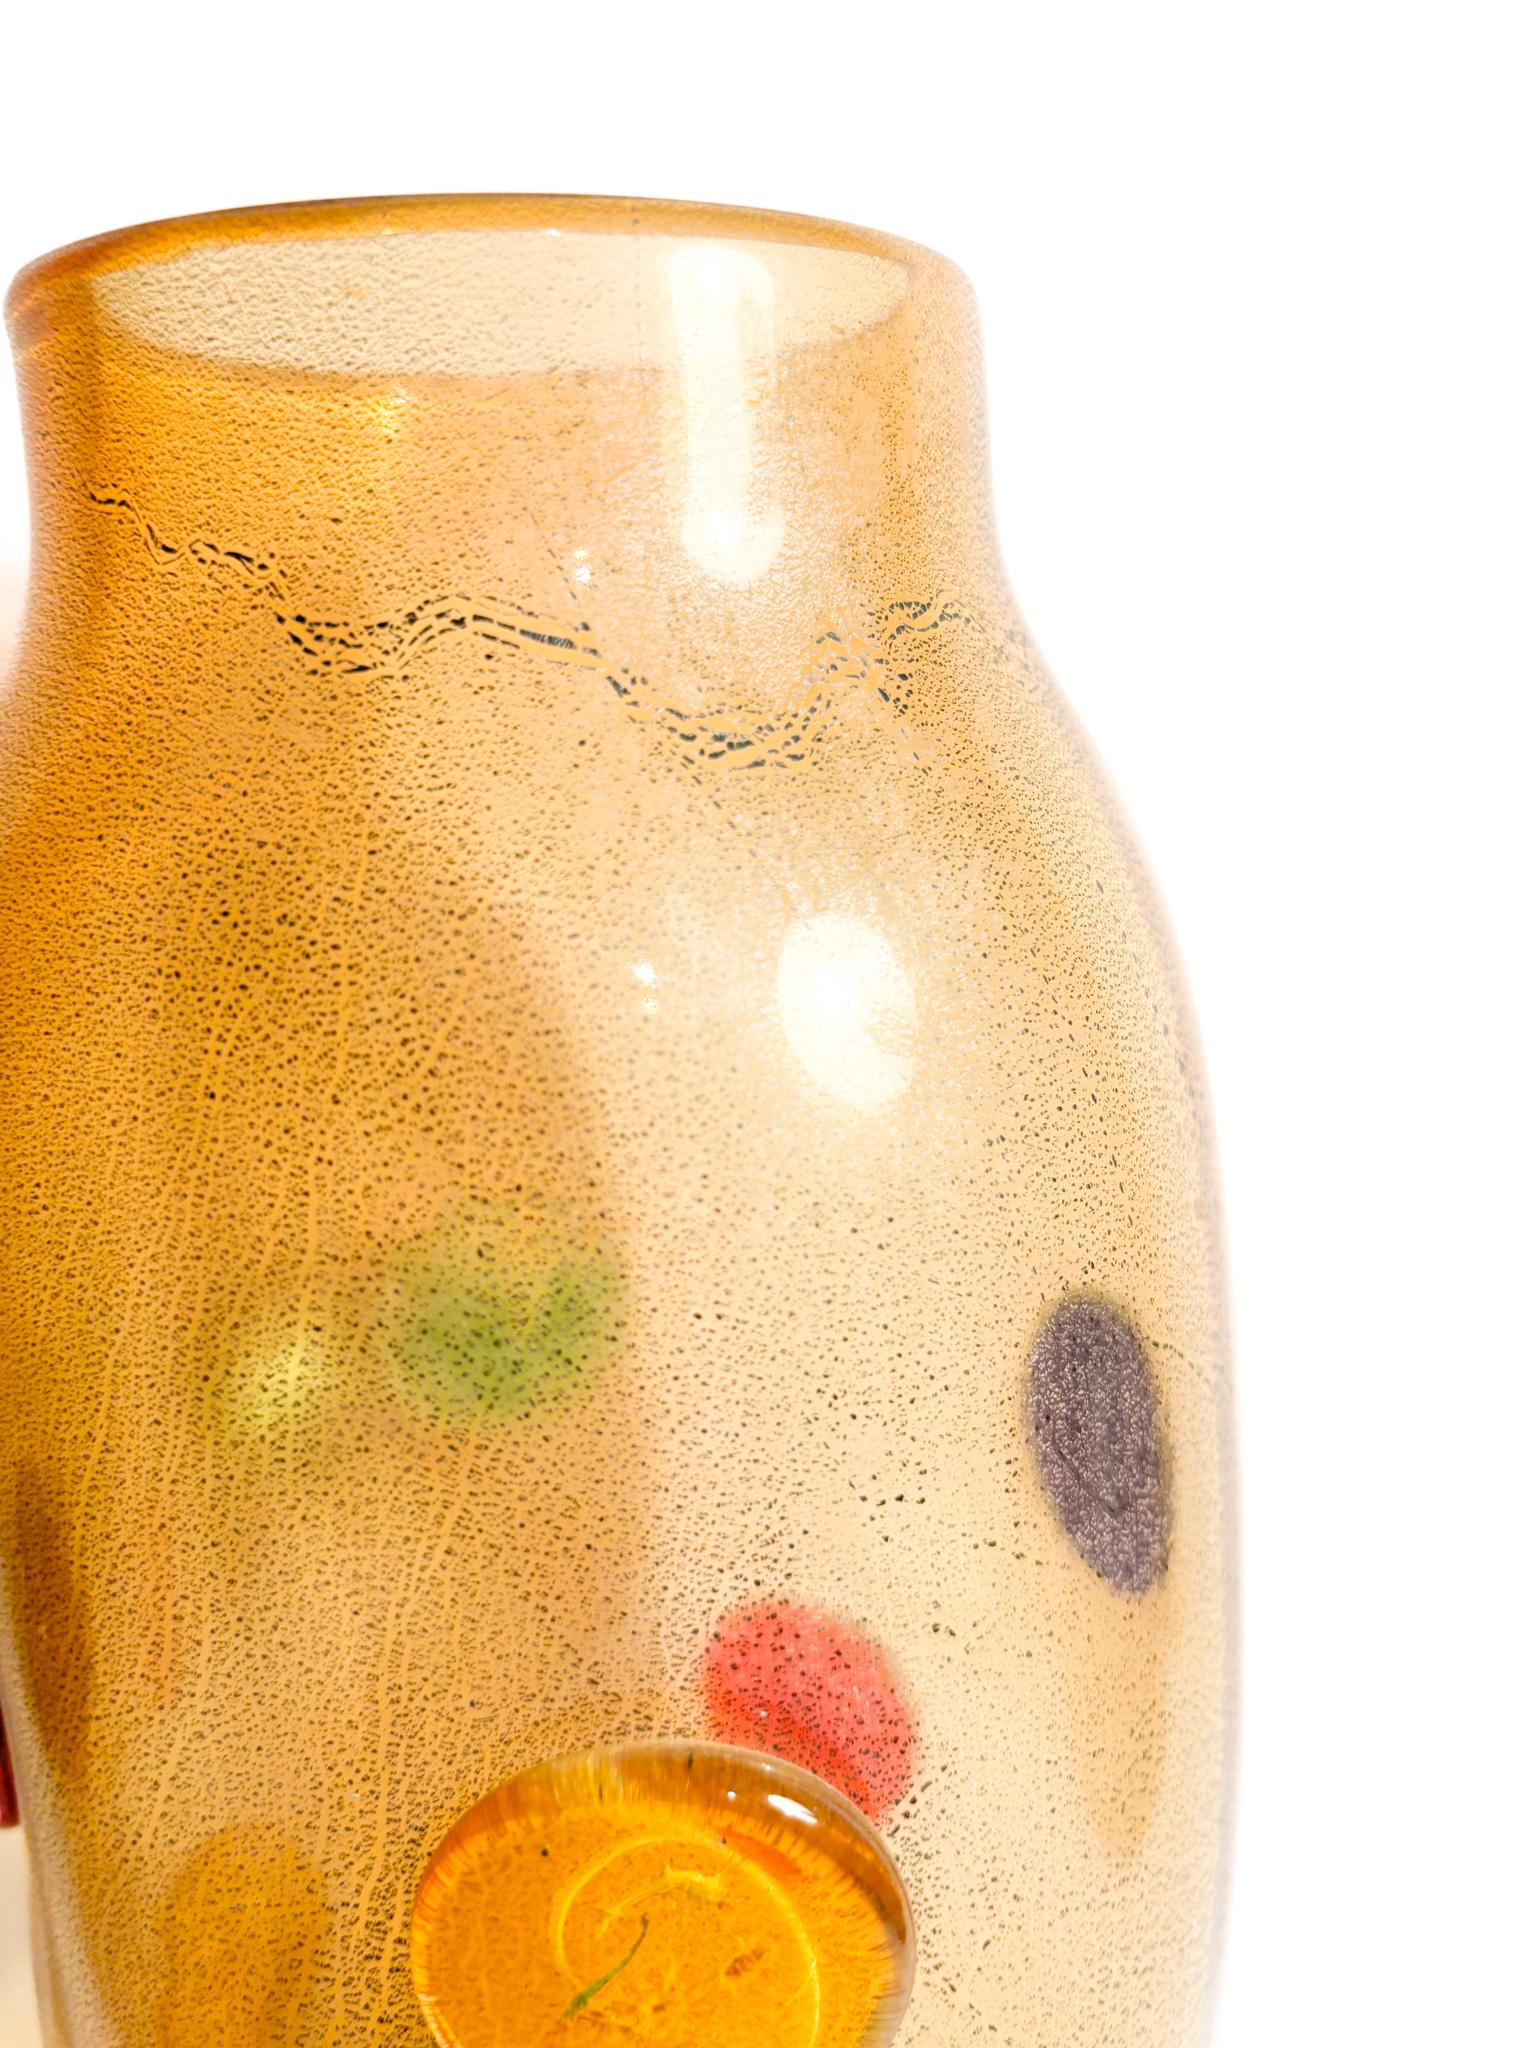 Multicolored Murano glass vase with gold leaf, made by La Murrina in the 1980s

Ø 12 cm h 33 cm

La Murrina is a well-known Murano glass company specializing in the creation of exquisite glass products. La Murrina was founded in 1965 by Dino Martens